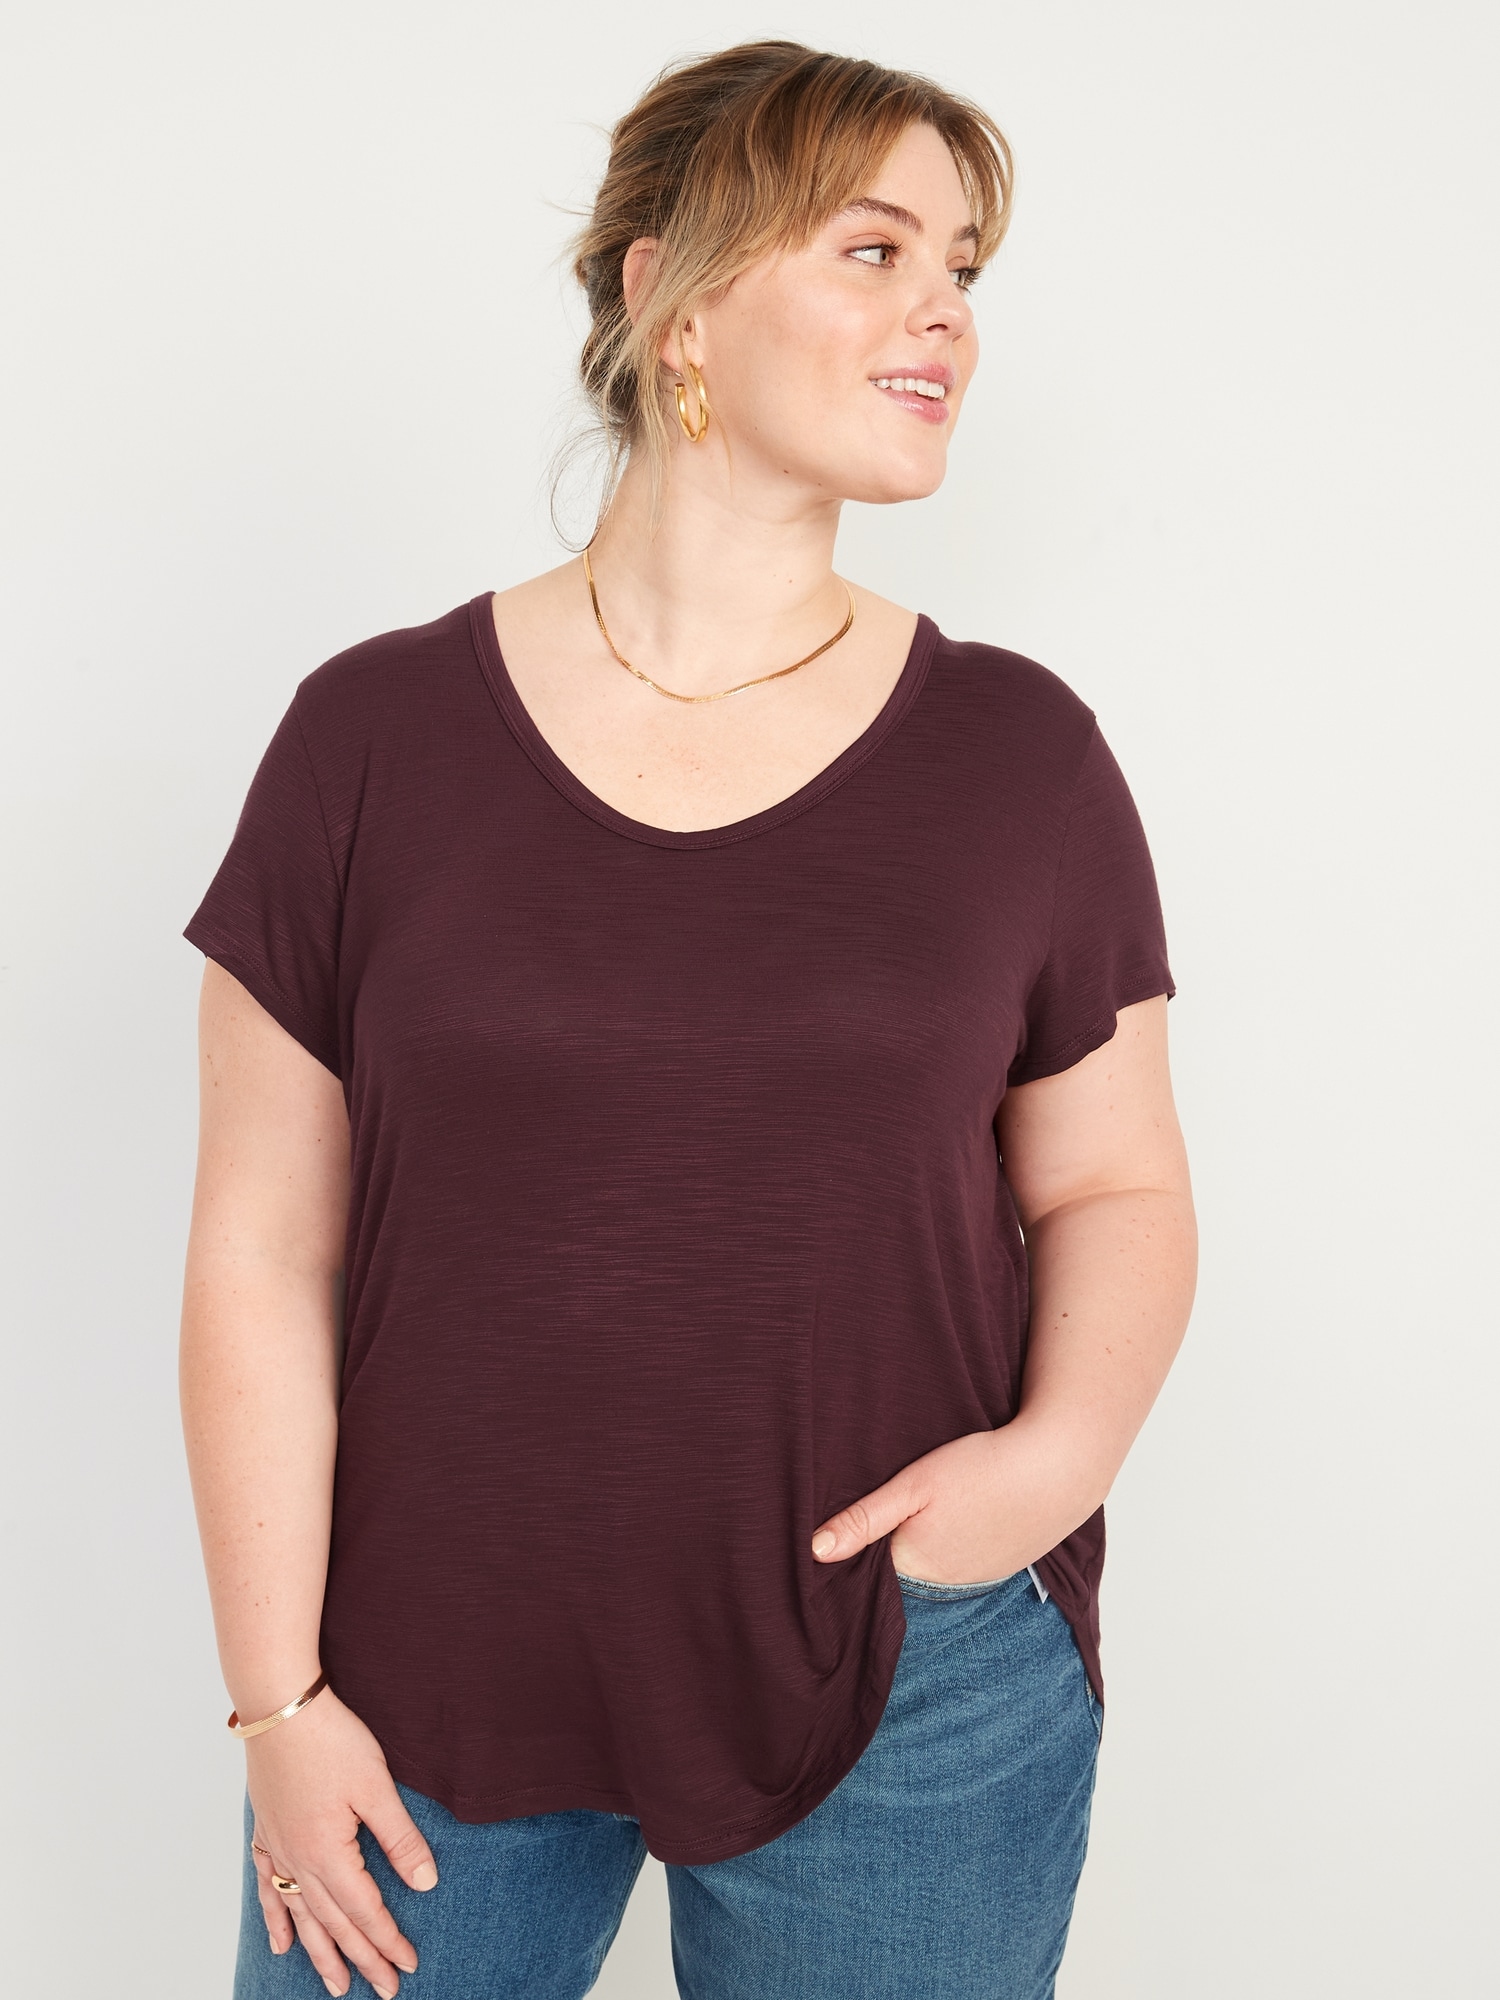 Luxe Slub-Knit Voop-Neck Tunic T-Shirt for Women | Old Navy